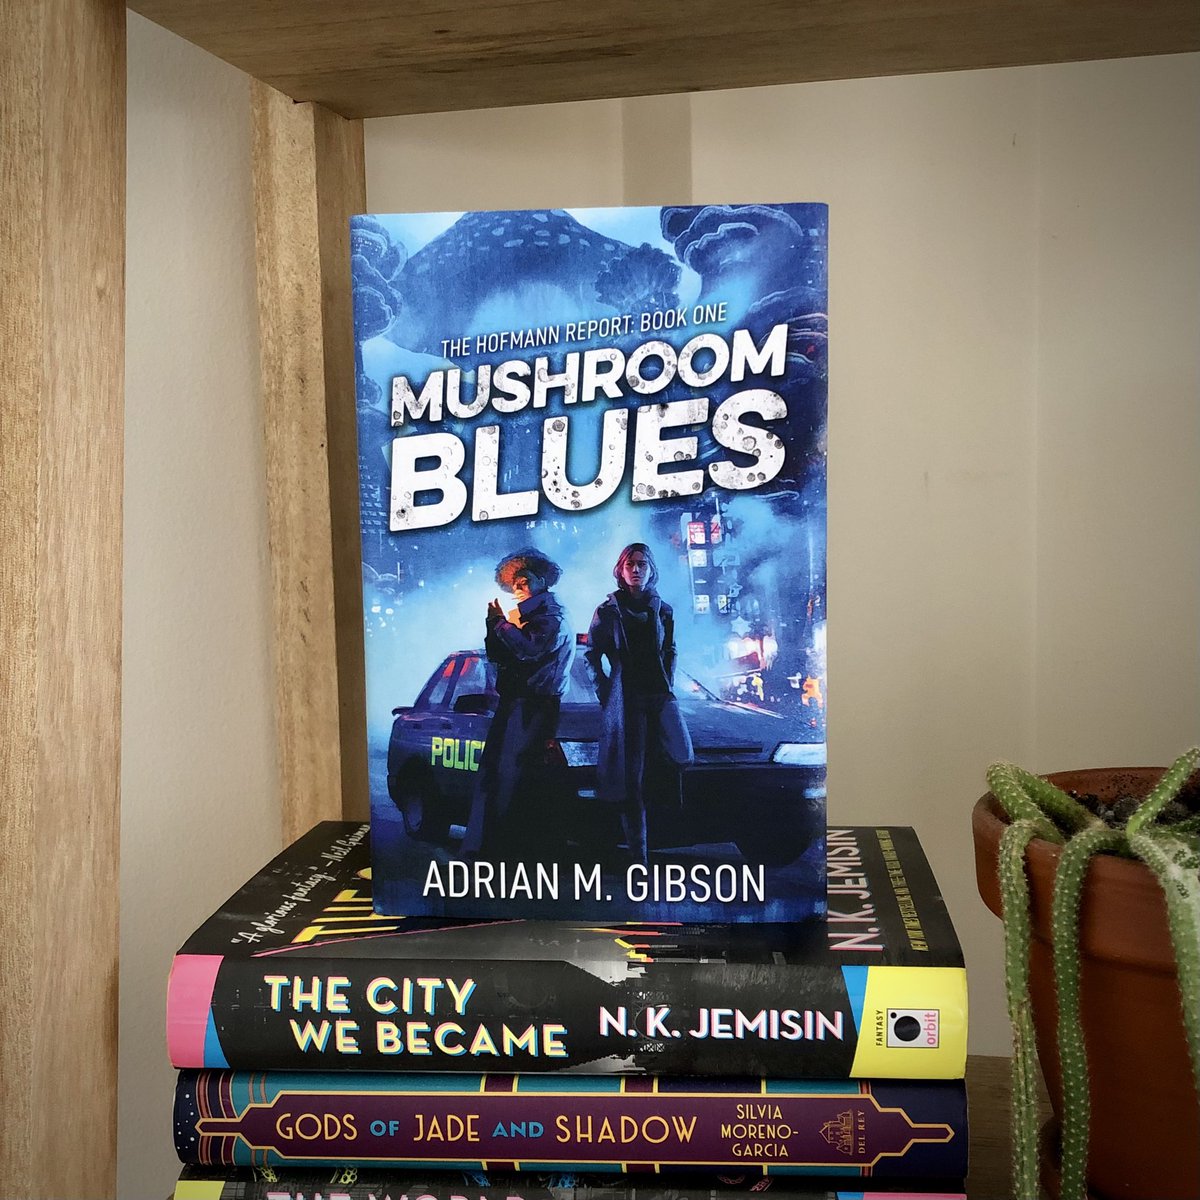 Found a home for my #MushroomBlues hardcover on the shelf! Check it out if you like:
🍄 Fungi
🔎 Police procedurals
🏃‍♂️ Fast pace
👁️ Psychedelics
😱 Body horror

BUY IT TODAY👇
Paperback: amzn.to/3VoOBNF
Hardcover: amzn.to/3vs5nAO
eBook/KU: a.co/d/fIKaQ9q